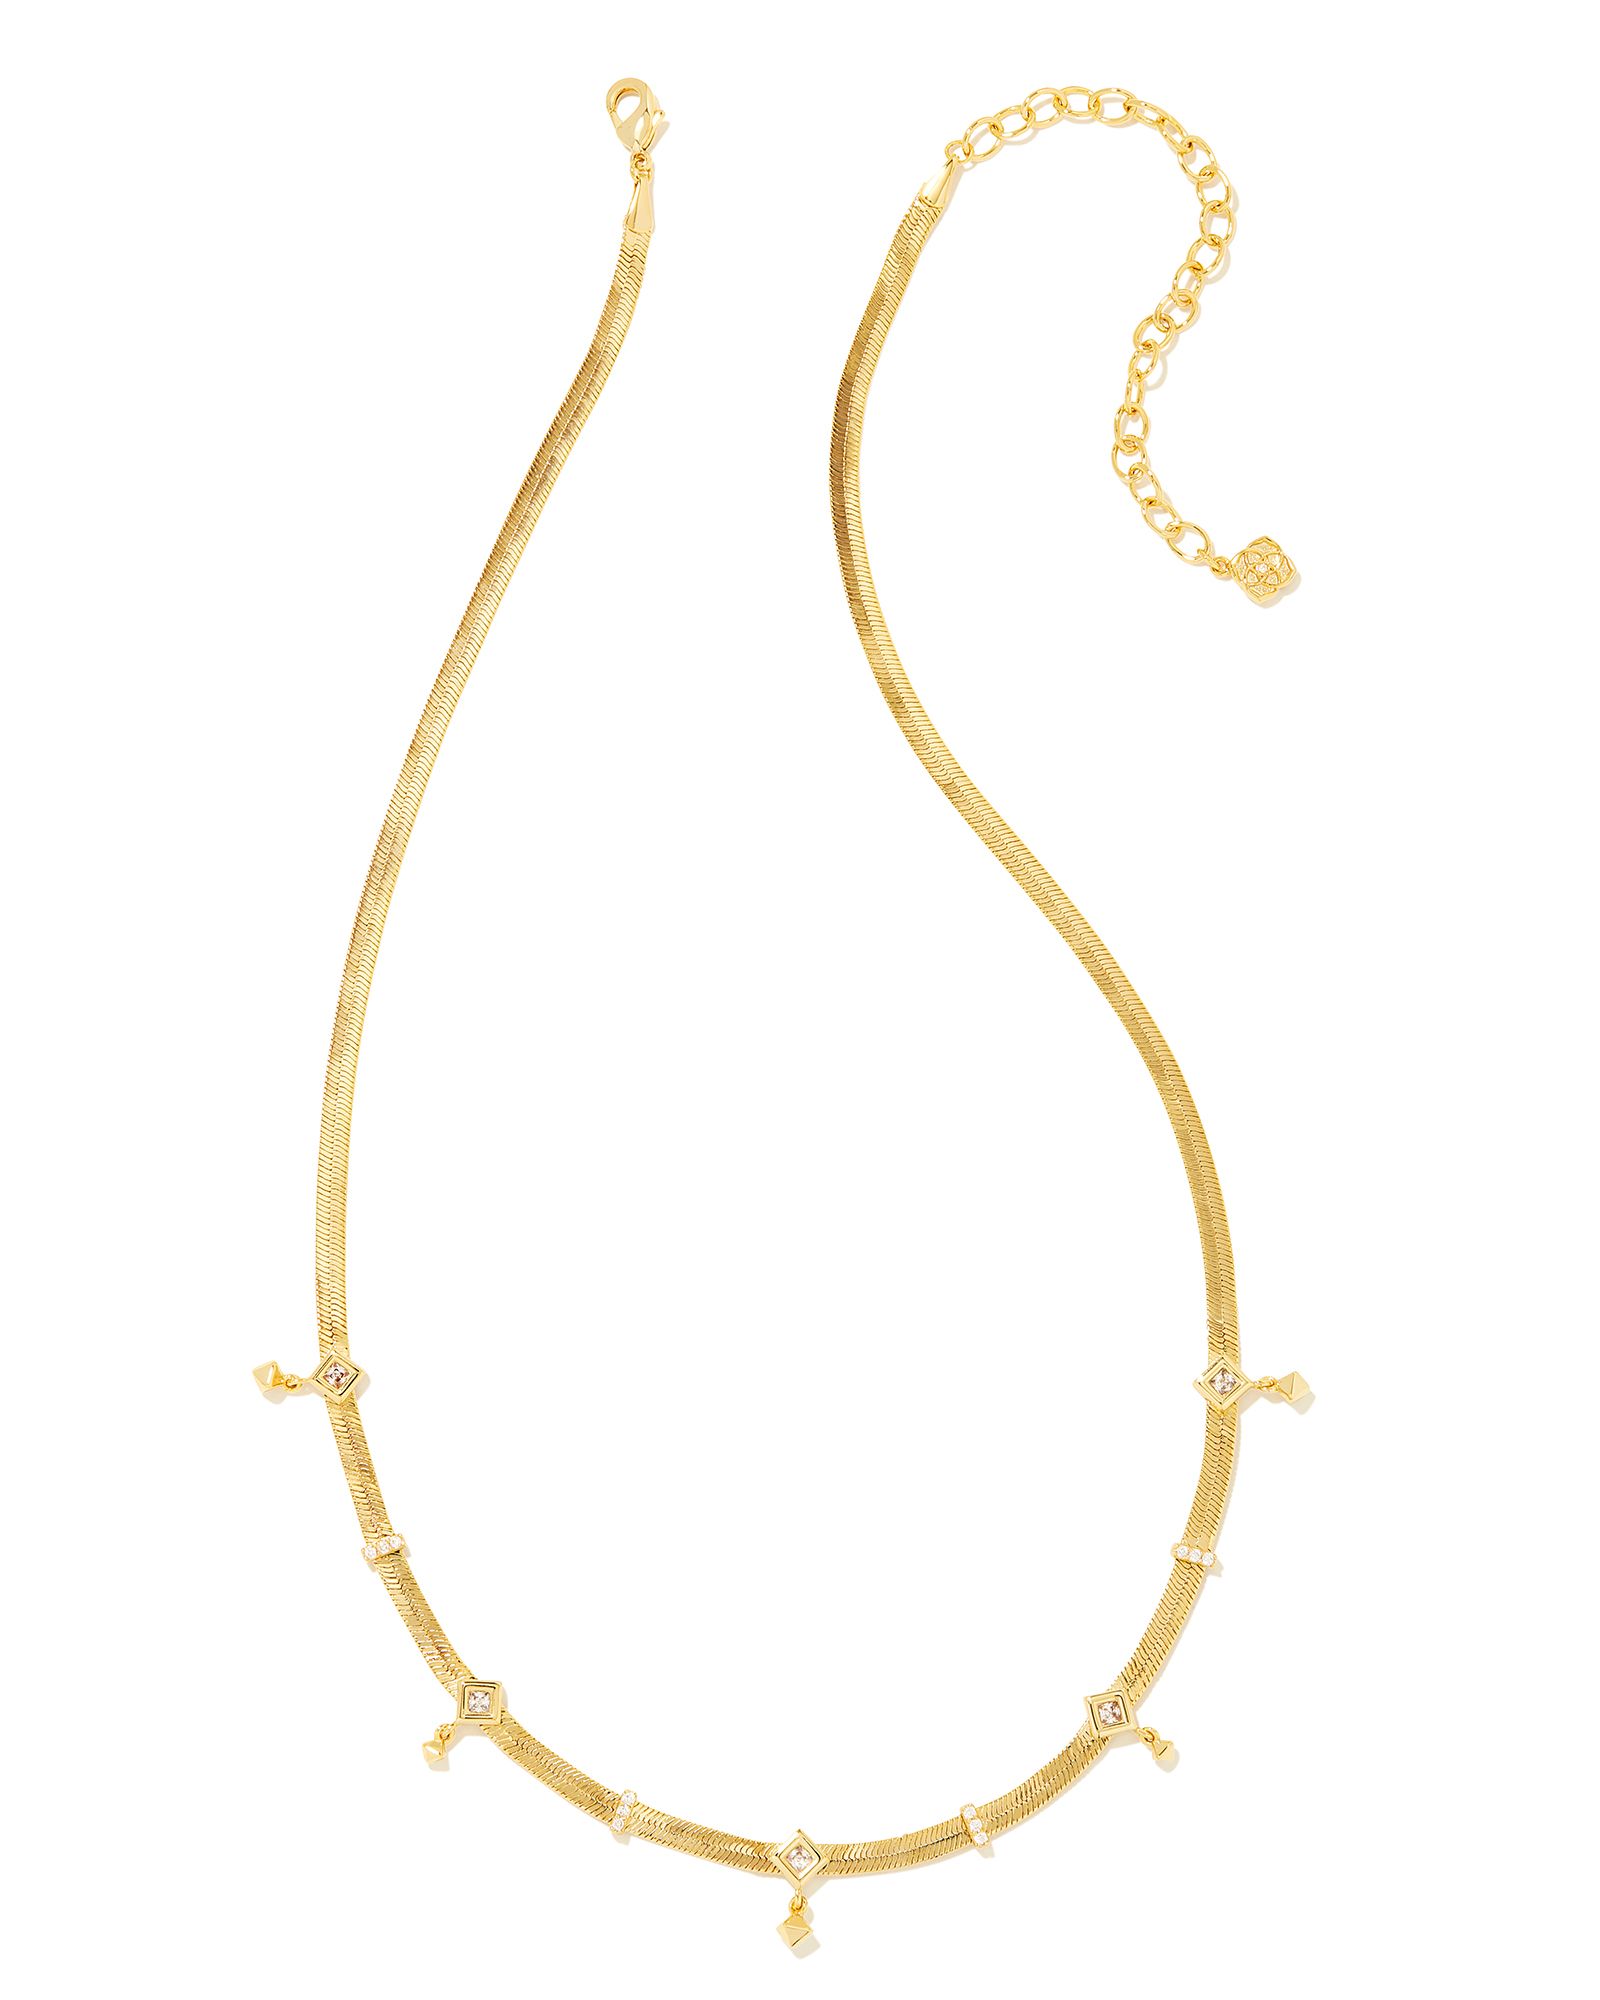 Gracie Gold Chain Necklace in White Crystal | Kendra Scott | Kendra Scott